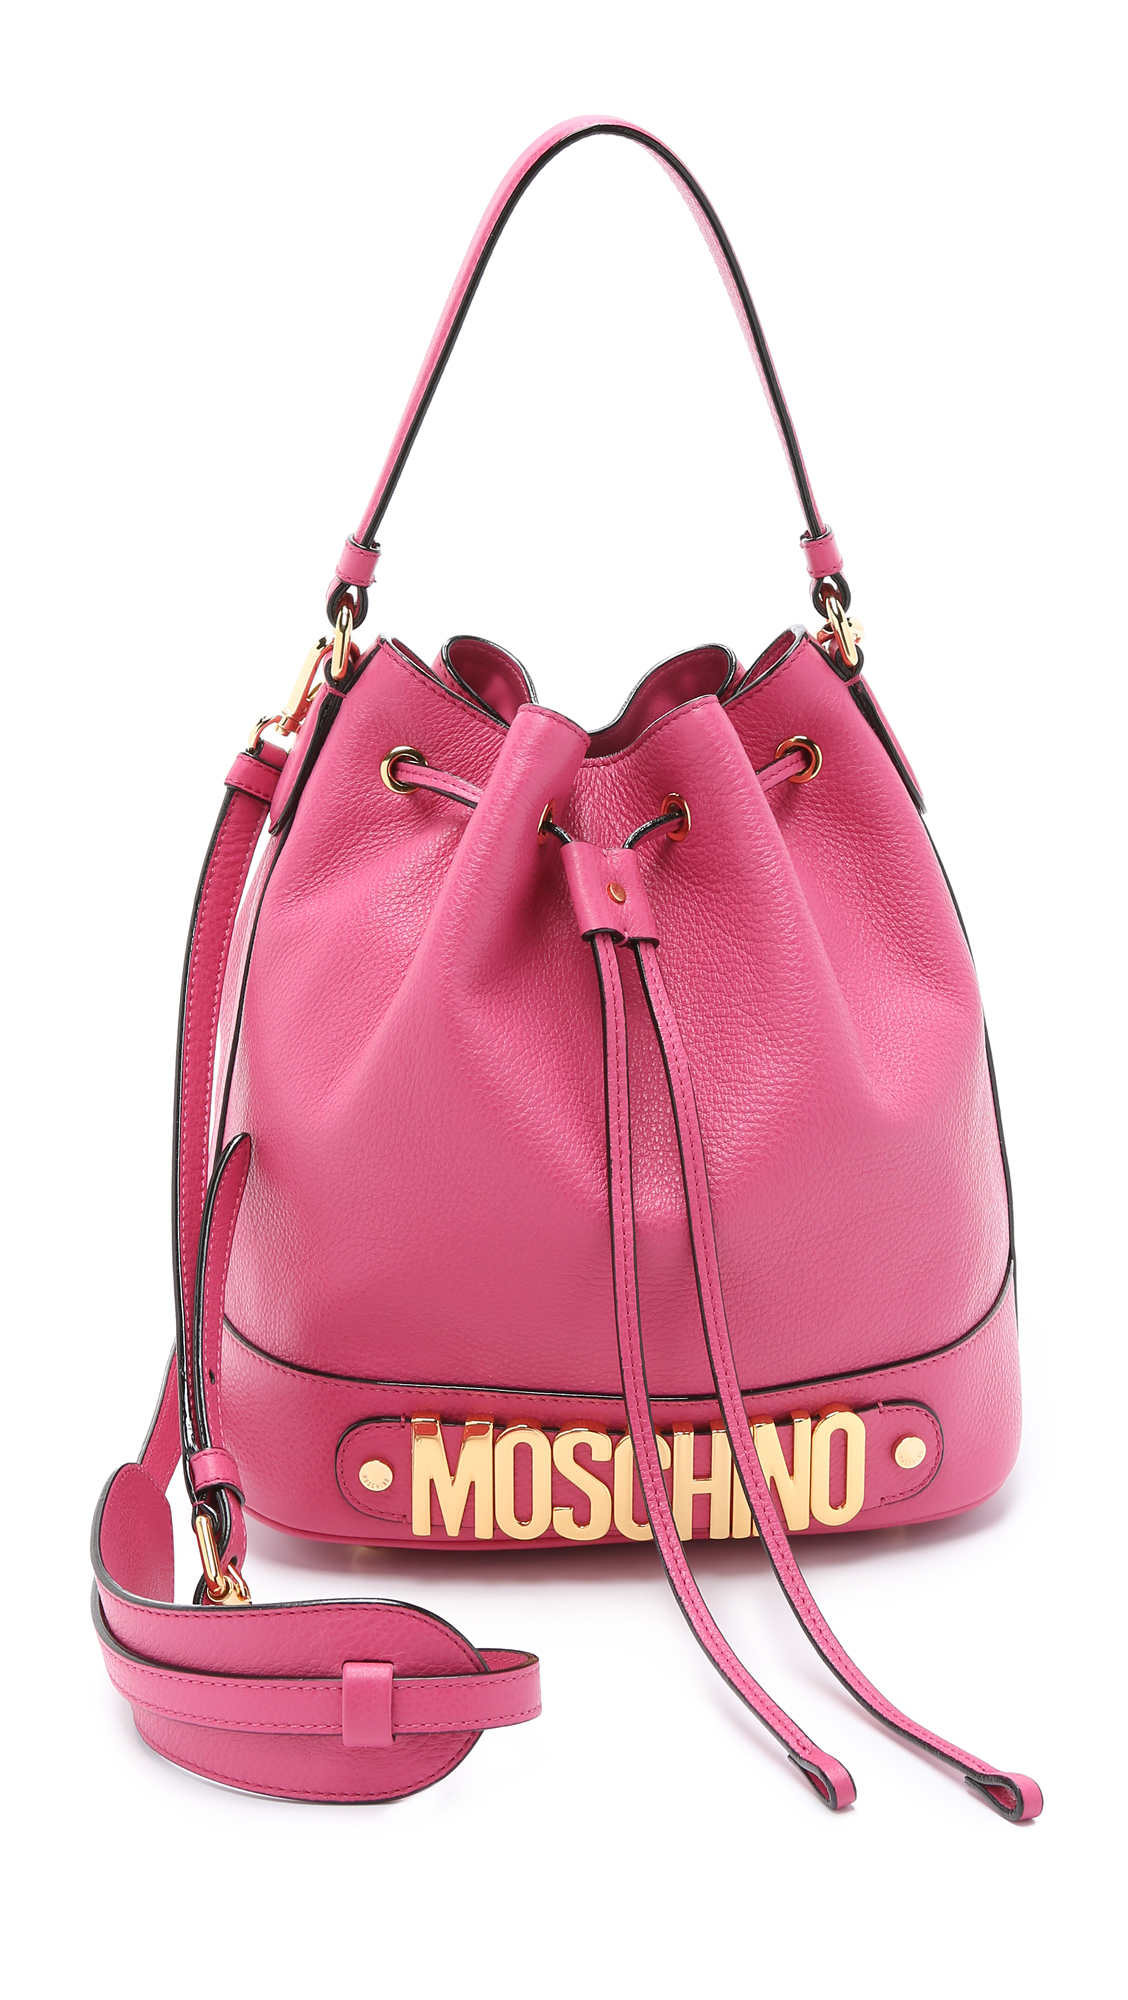 Lyst - Moschino Leather Bucket Bag - Pink in Pink